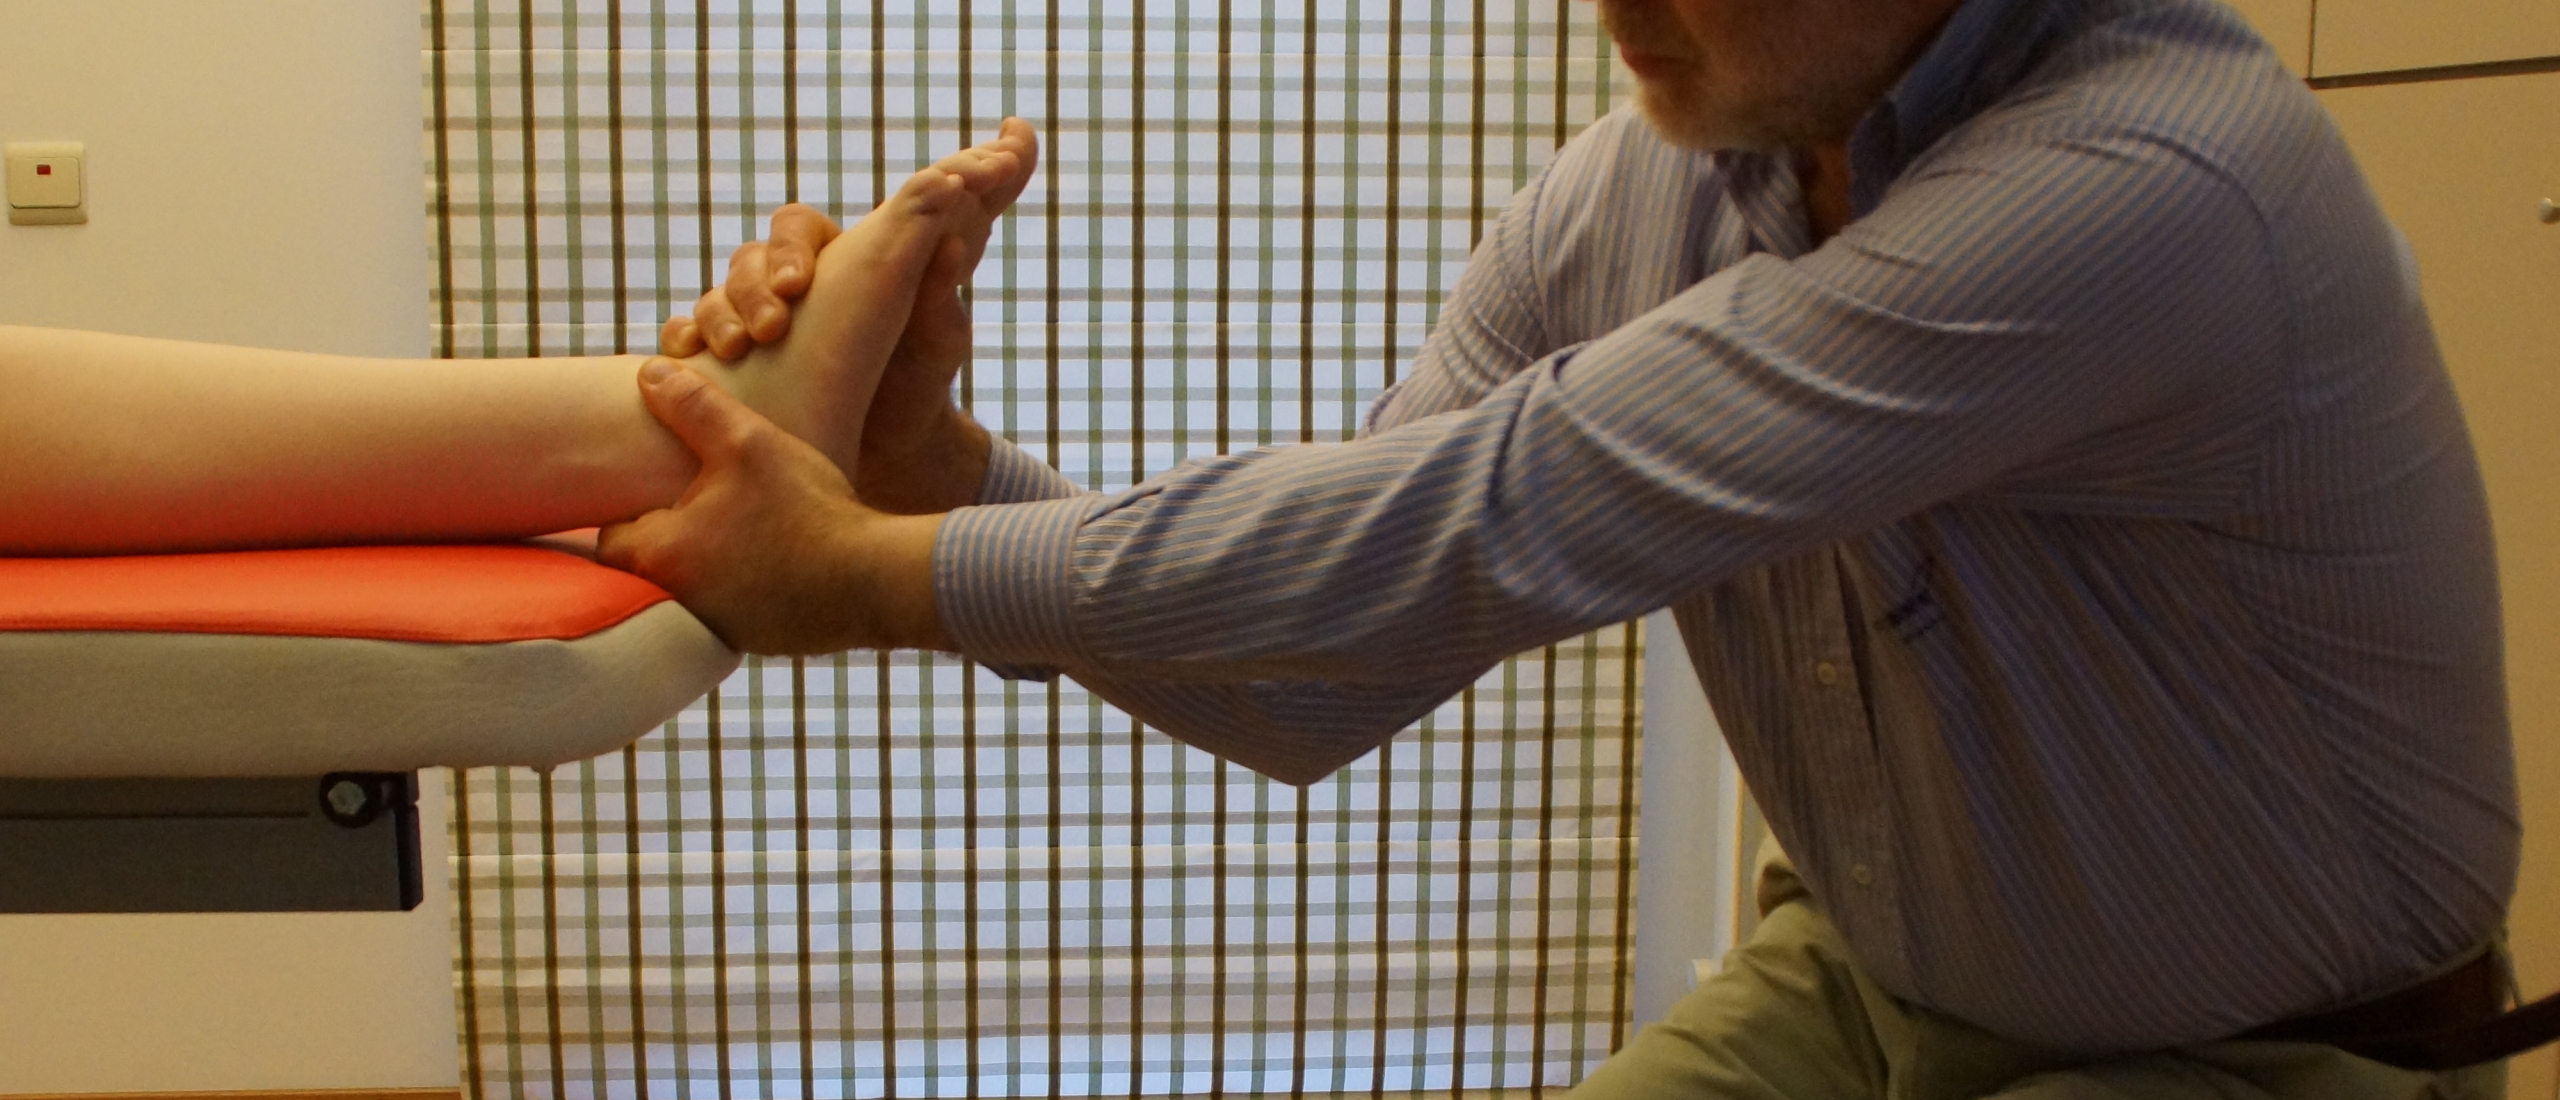 loose body manipulation for the ankle